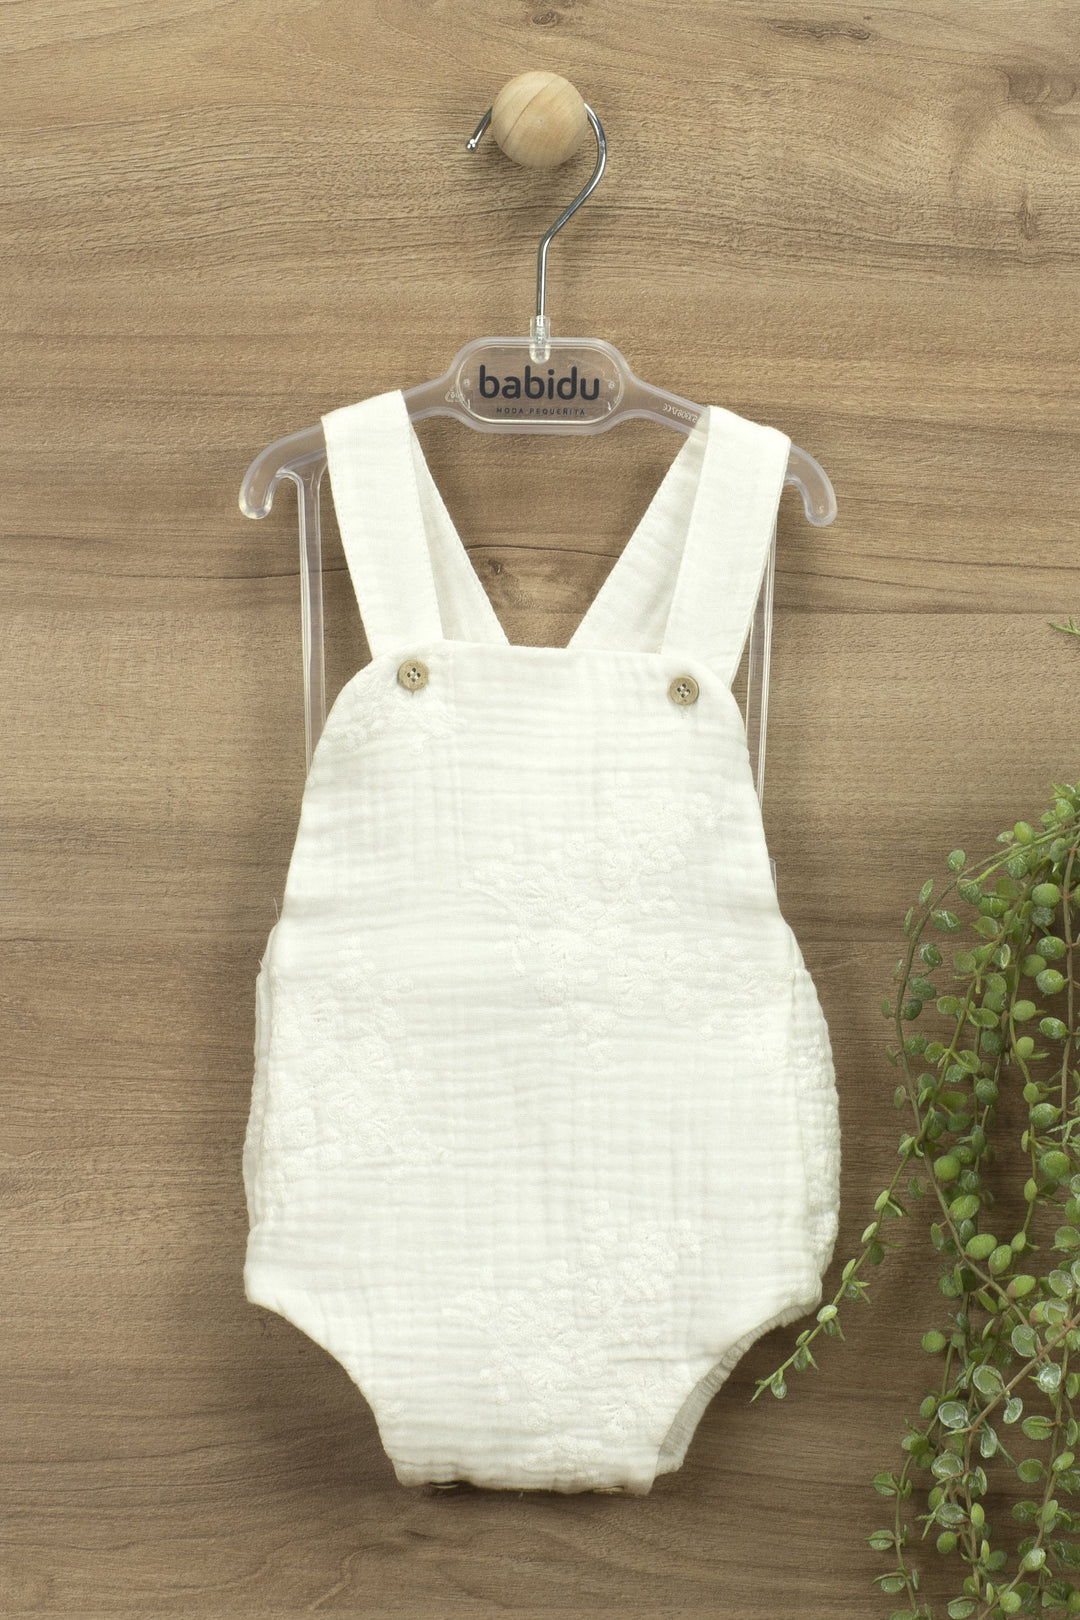 Babidu "Lilith" Lace Cheesecloth Dungaree Romper | Millie and John